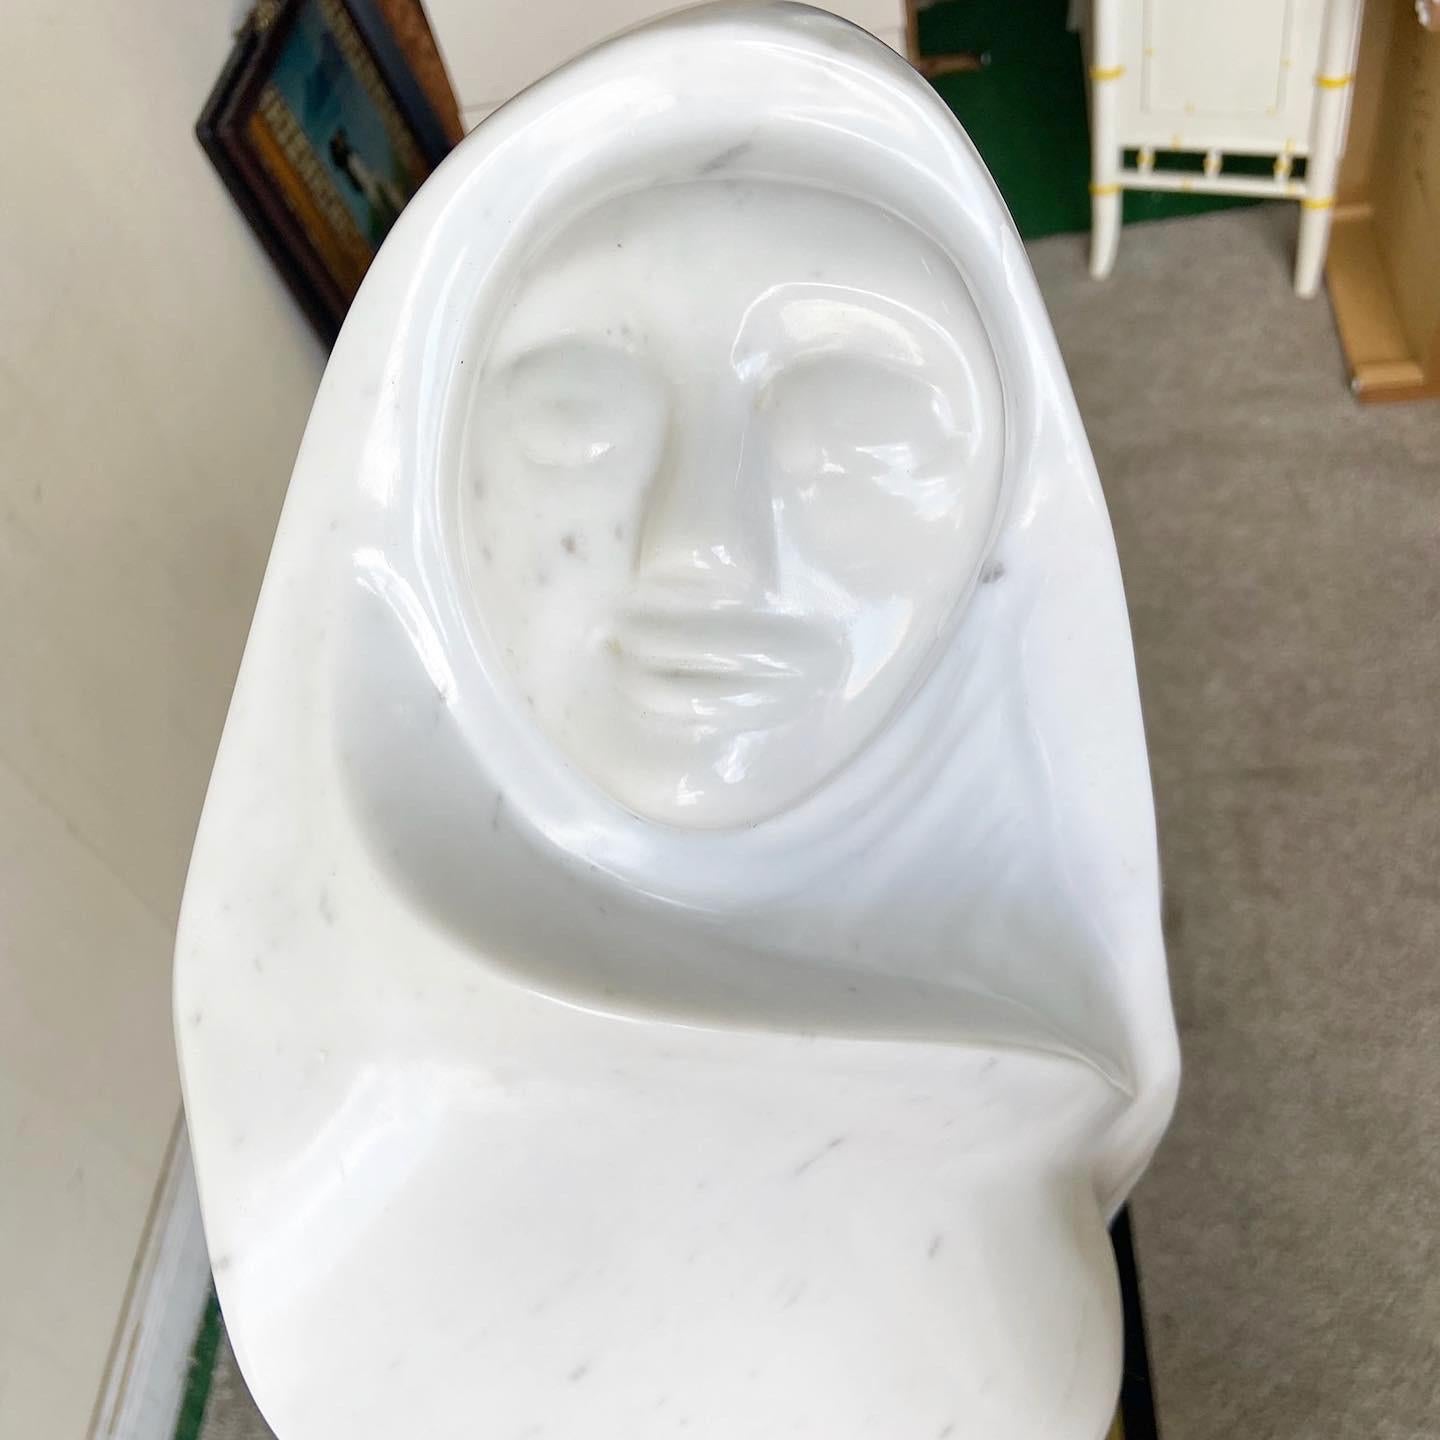 Postmodern Woman in White Marble Sculpture on Metal Pedestal - 2 Pieces For Sale 4